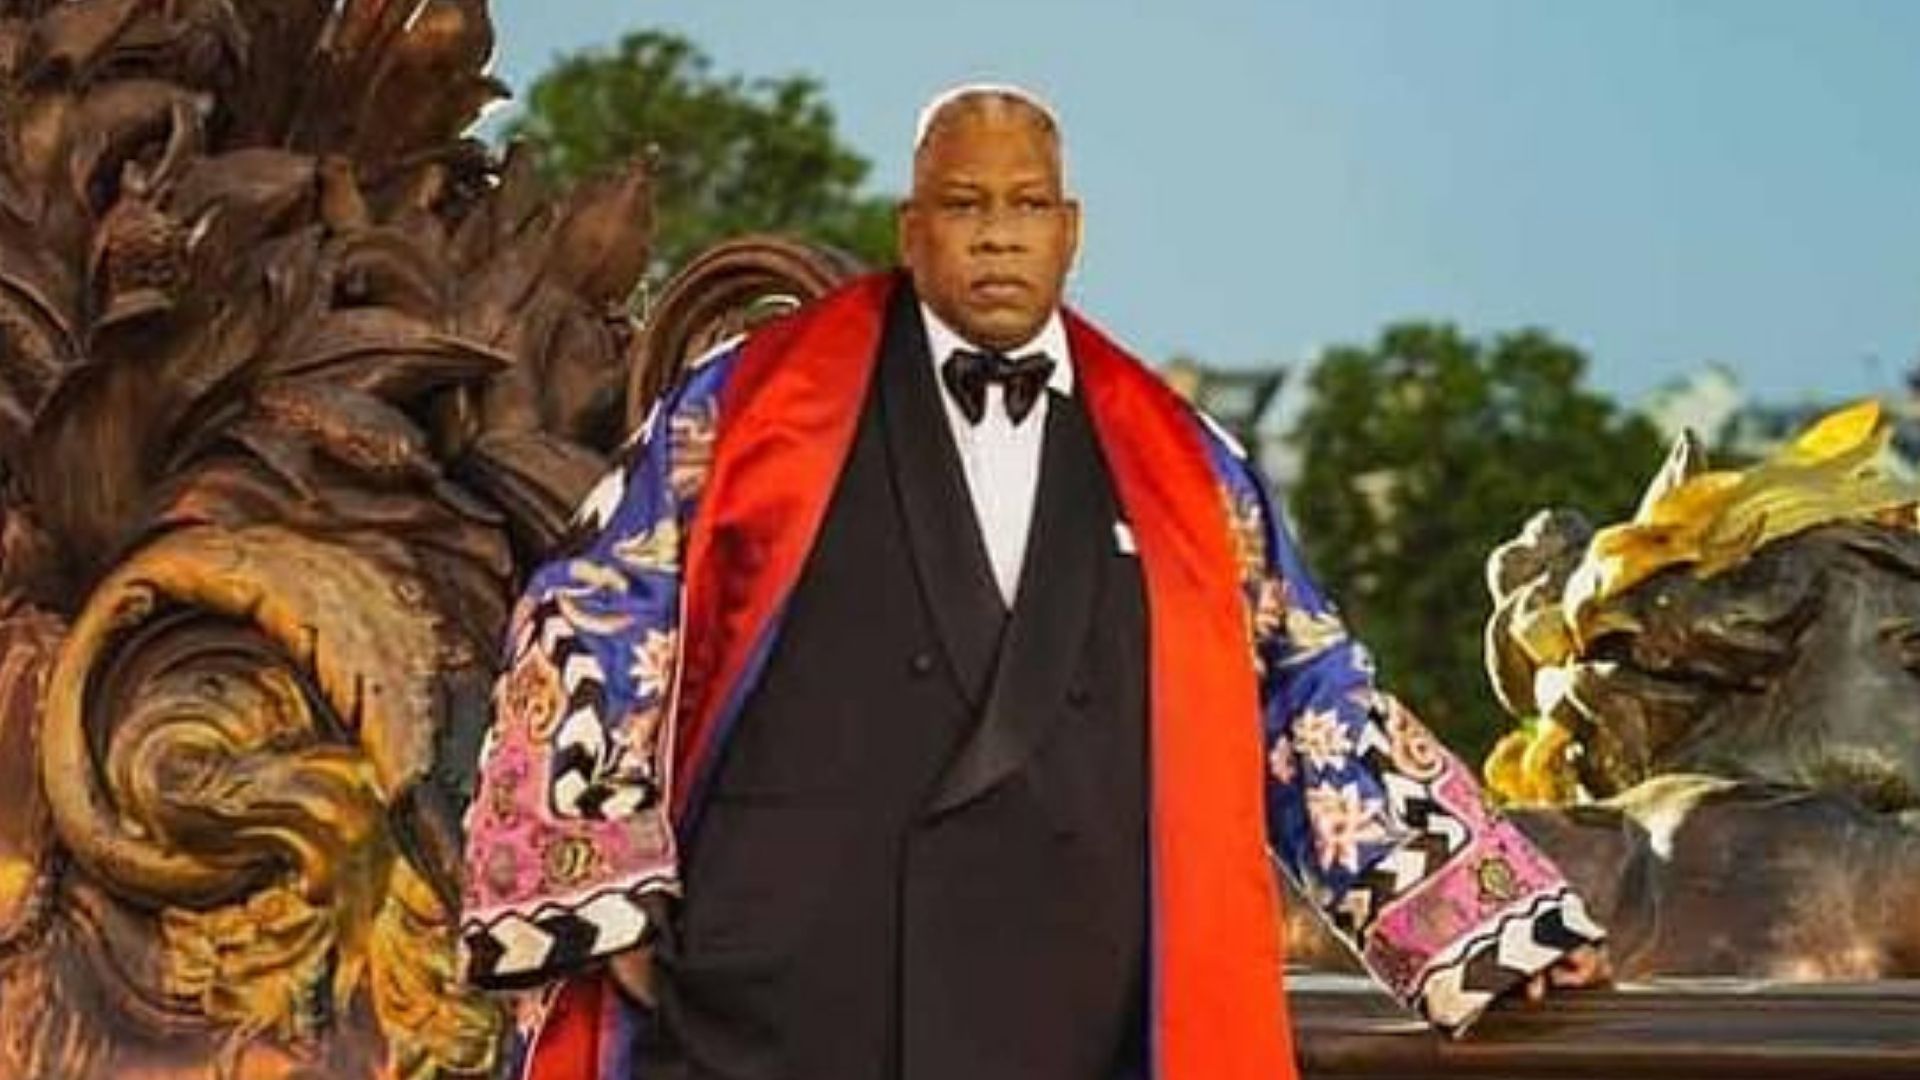 André Leon Talley has passed away at the age of 73